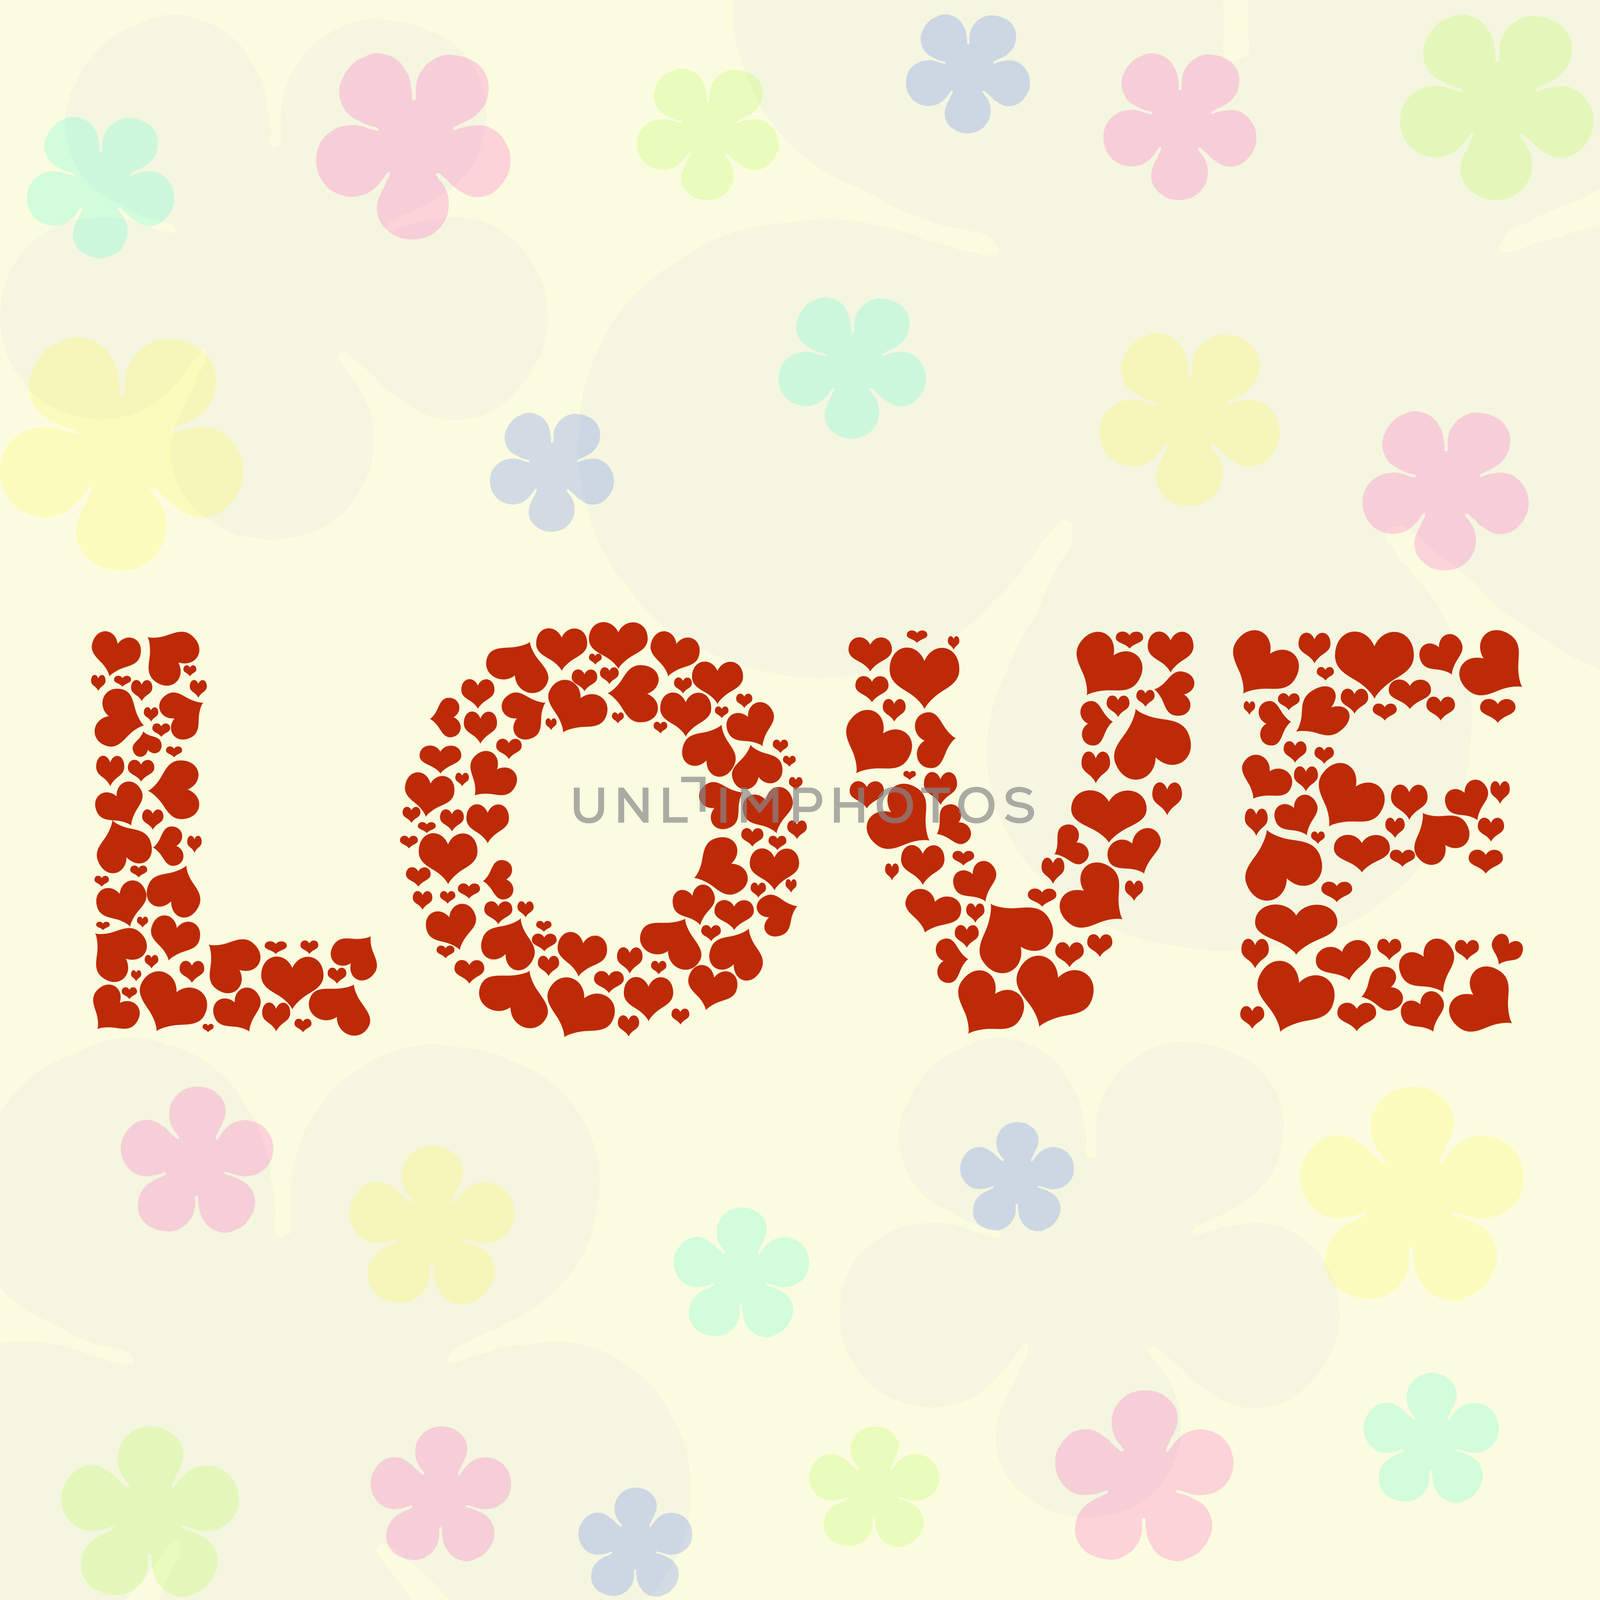 Love wording made from red heart shape by Gamjai